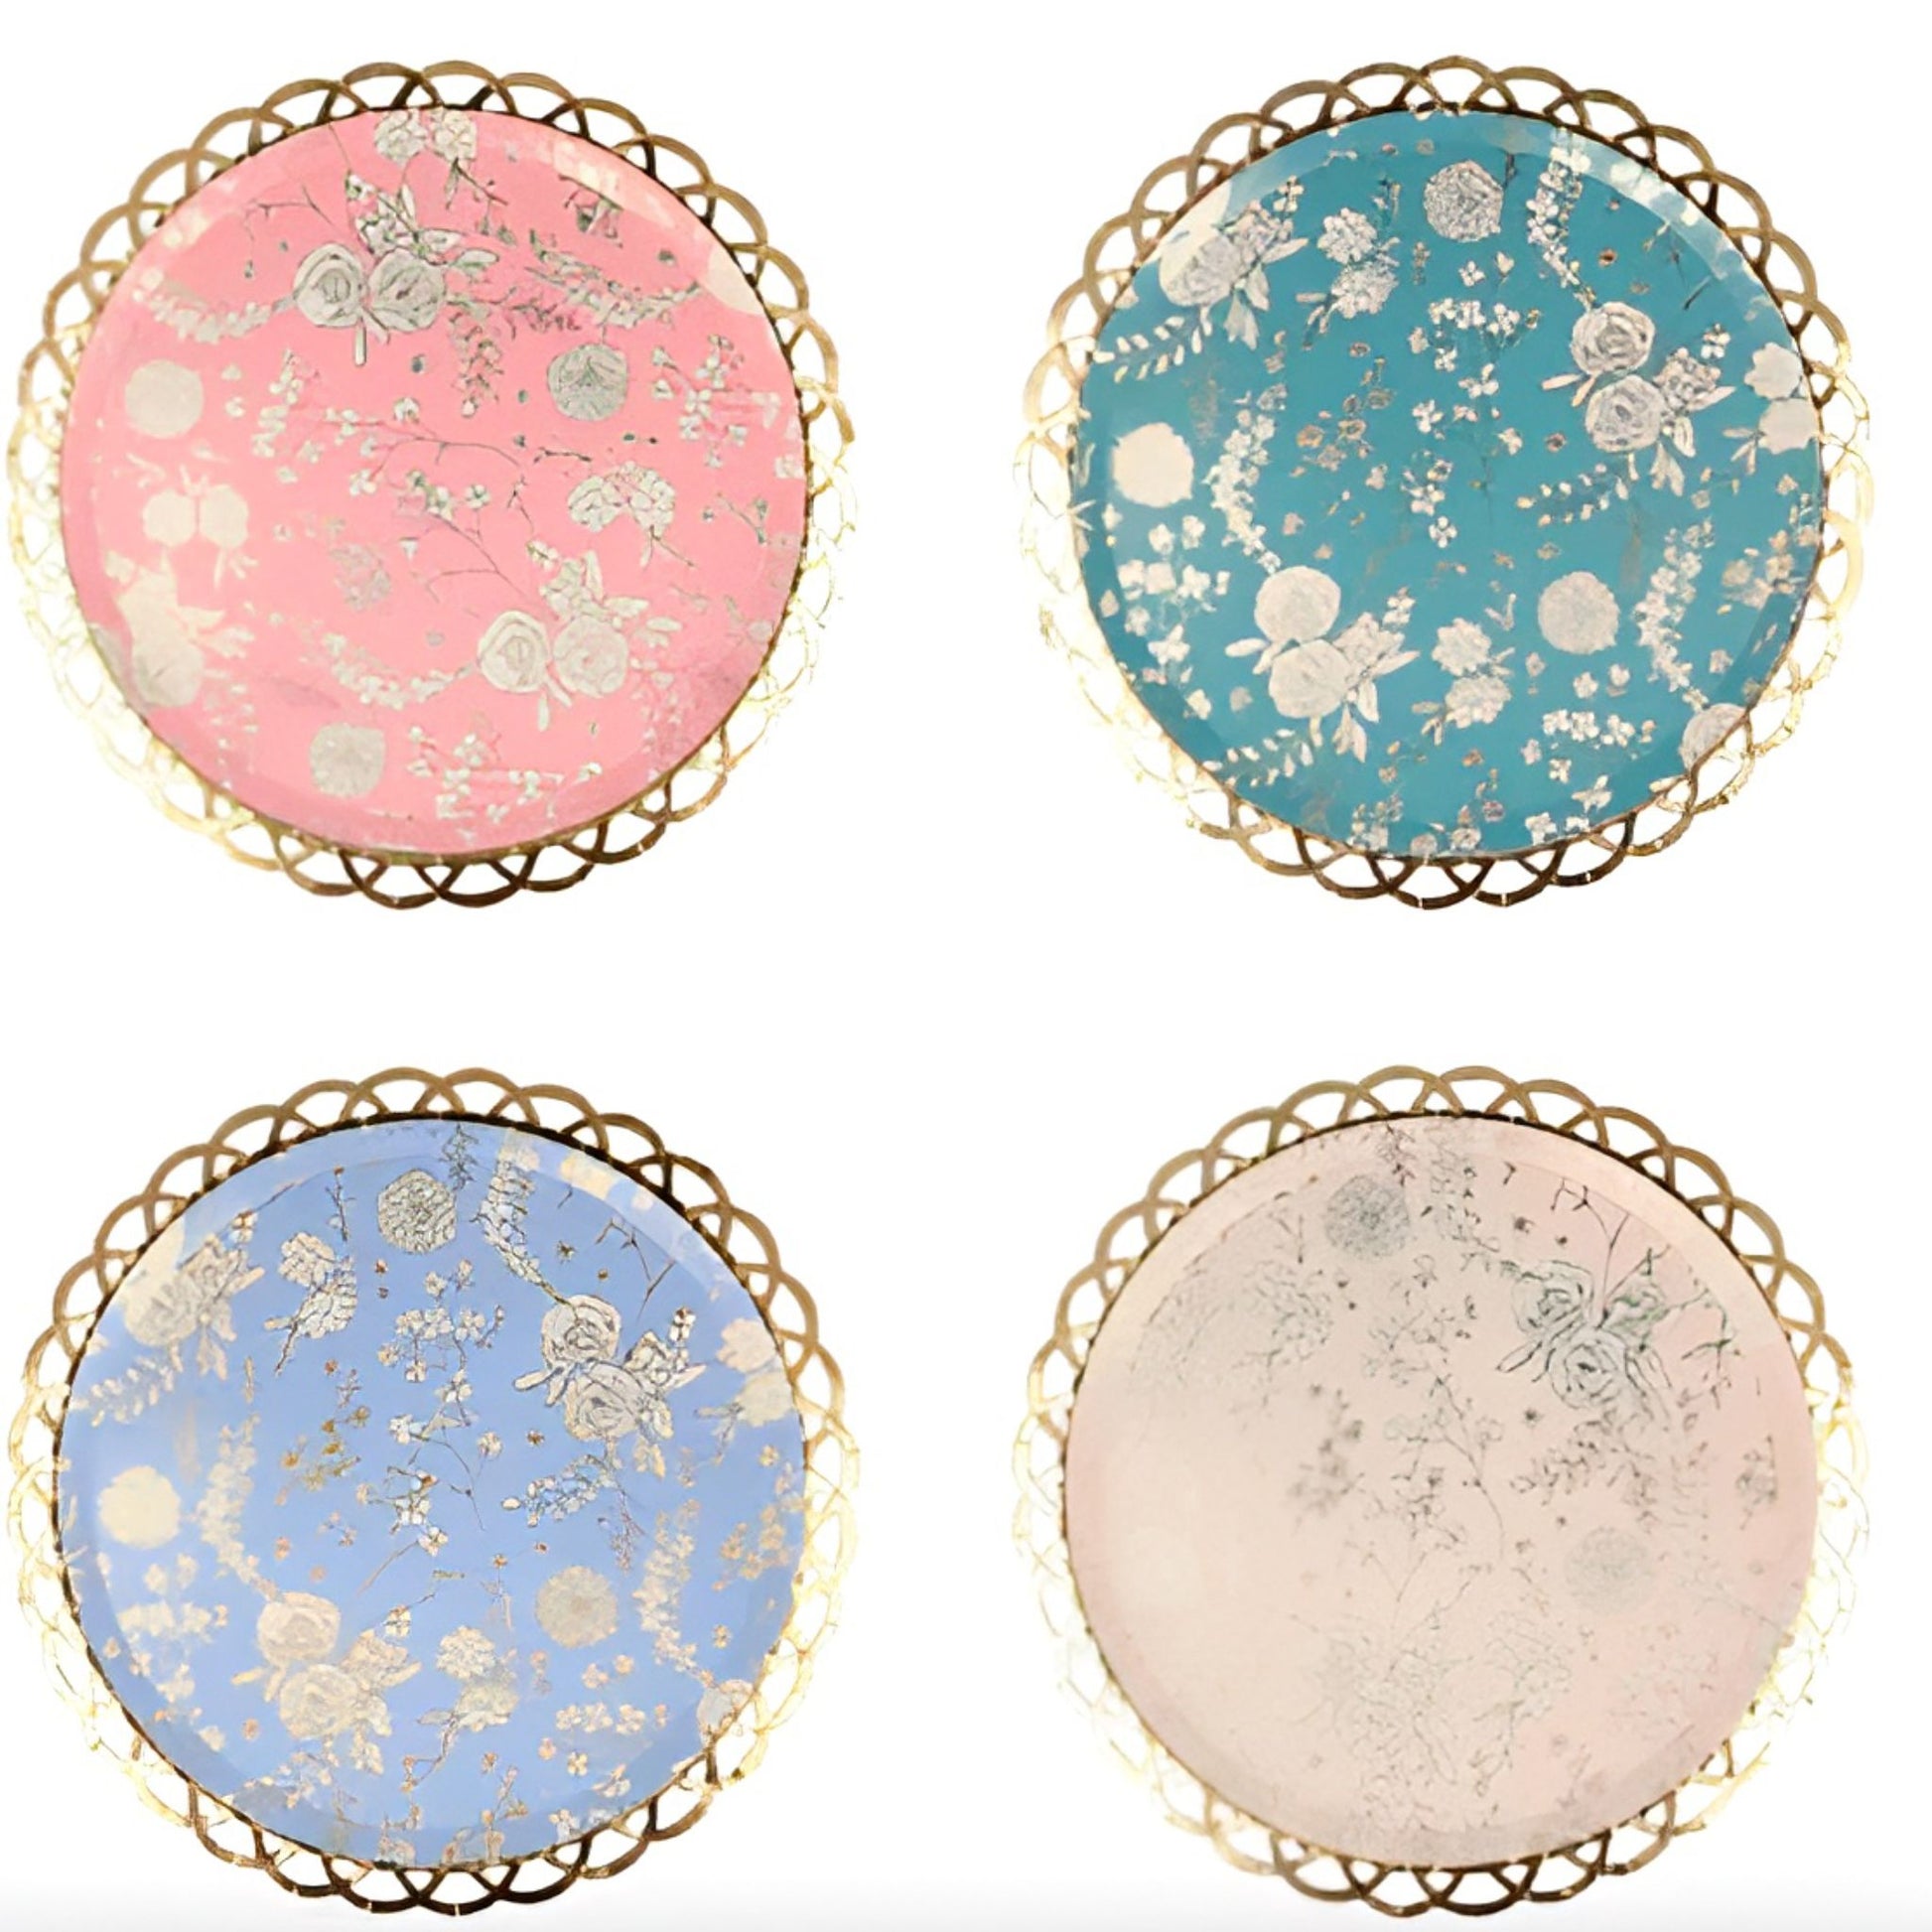 4 designs of floral dinner plates by Meri Meri. Lilac, dark green, cream and pink with gold foil detail and lace border. 24cm